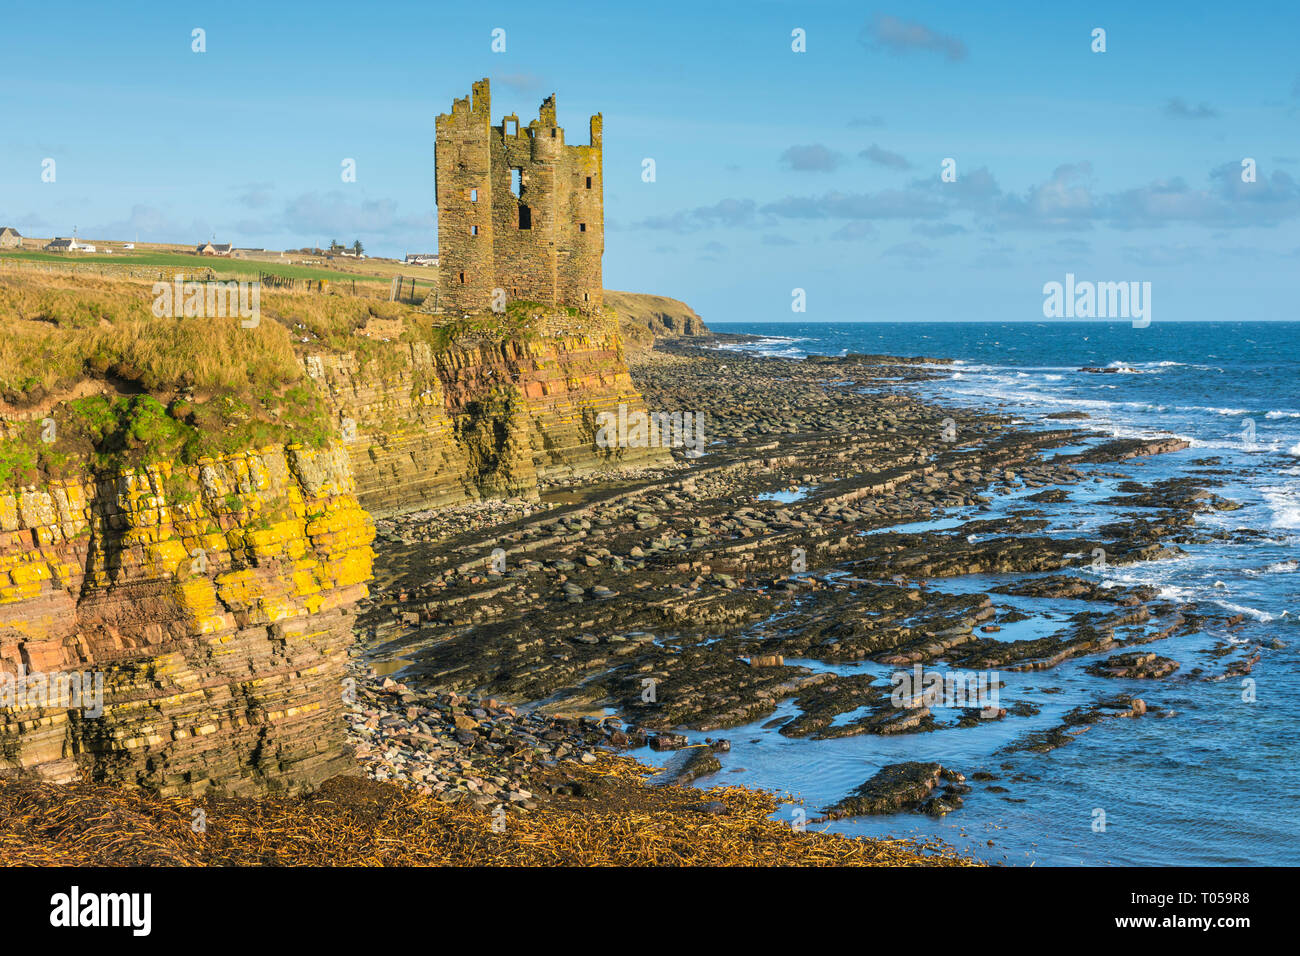 Keiss Castle, built by George Sinclair, 5th Earl of Caithness, in the late 16th or early 17th century.  Sinclair's Bay, Keiss, Caithness, Scotland, UK Stock Photo